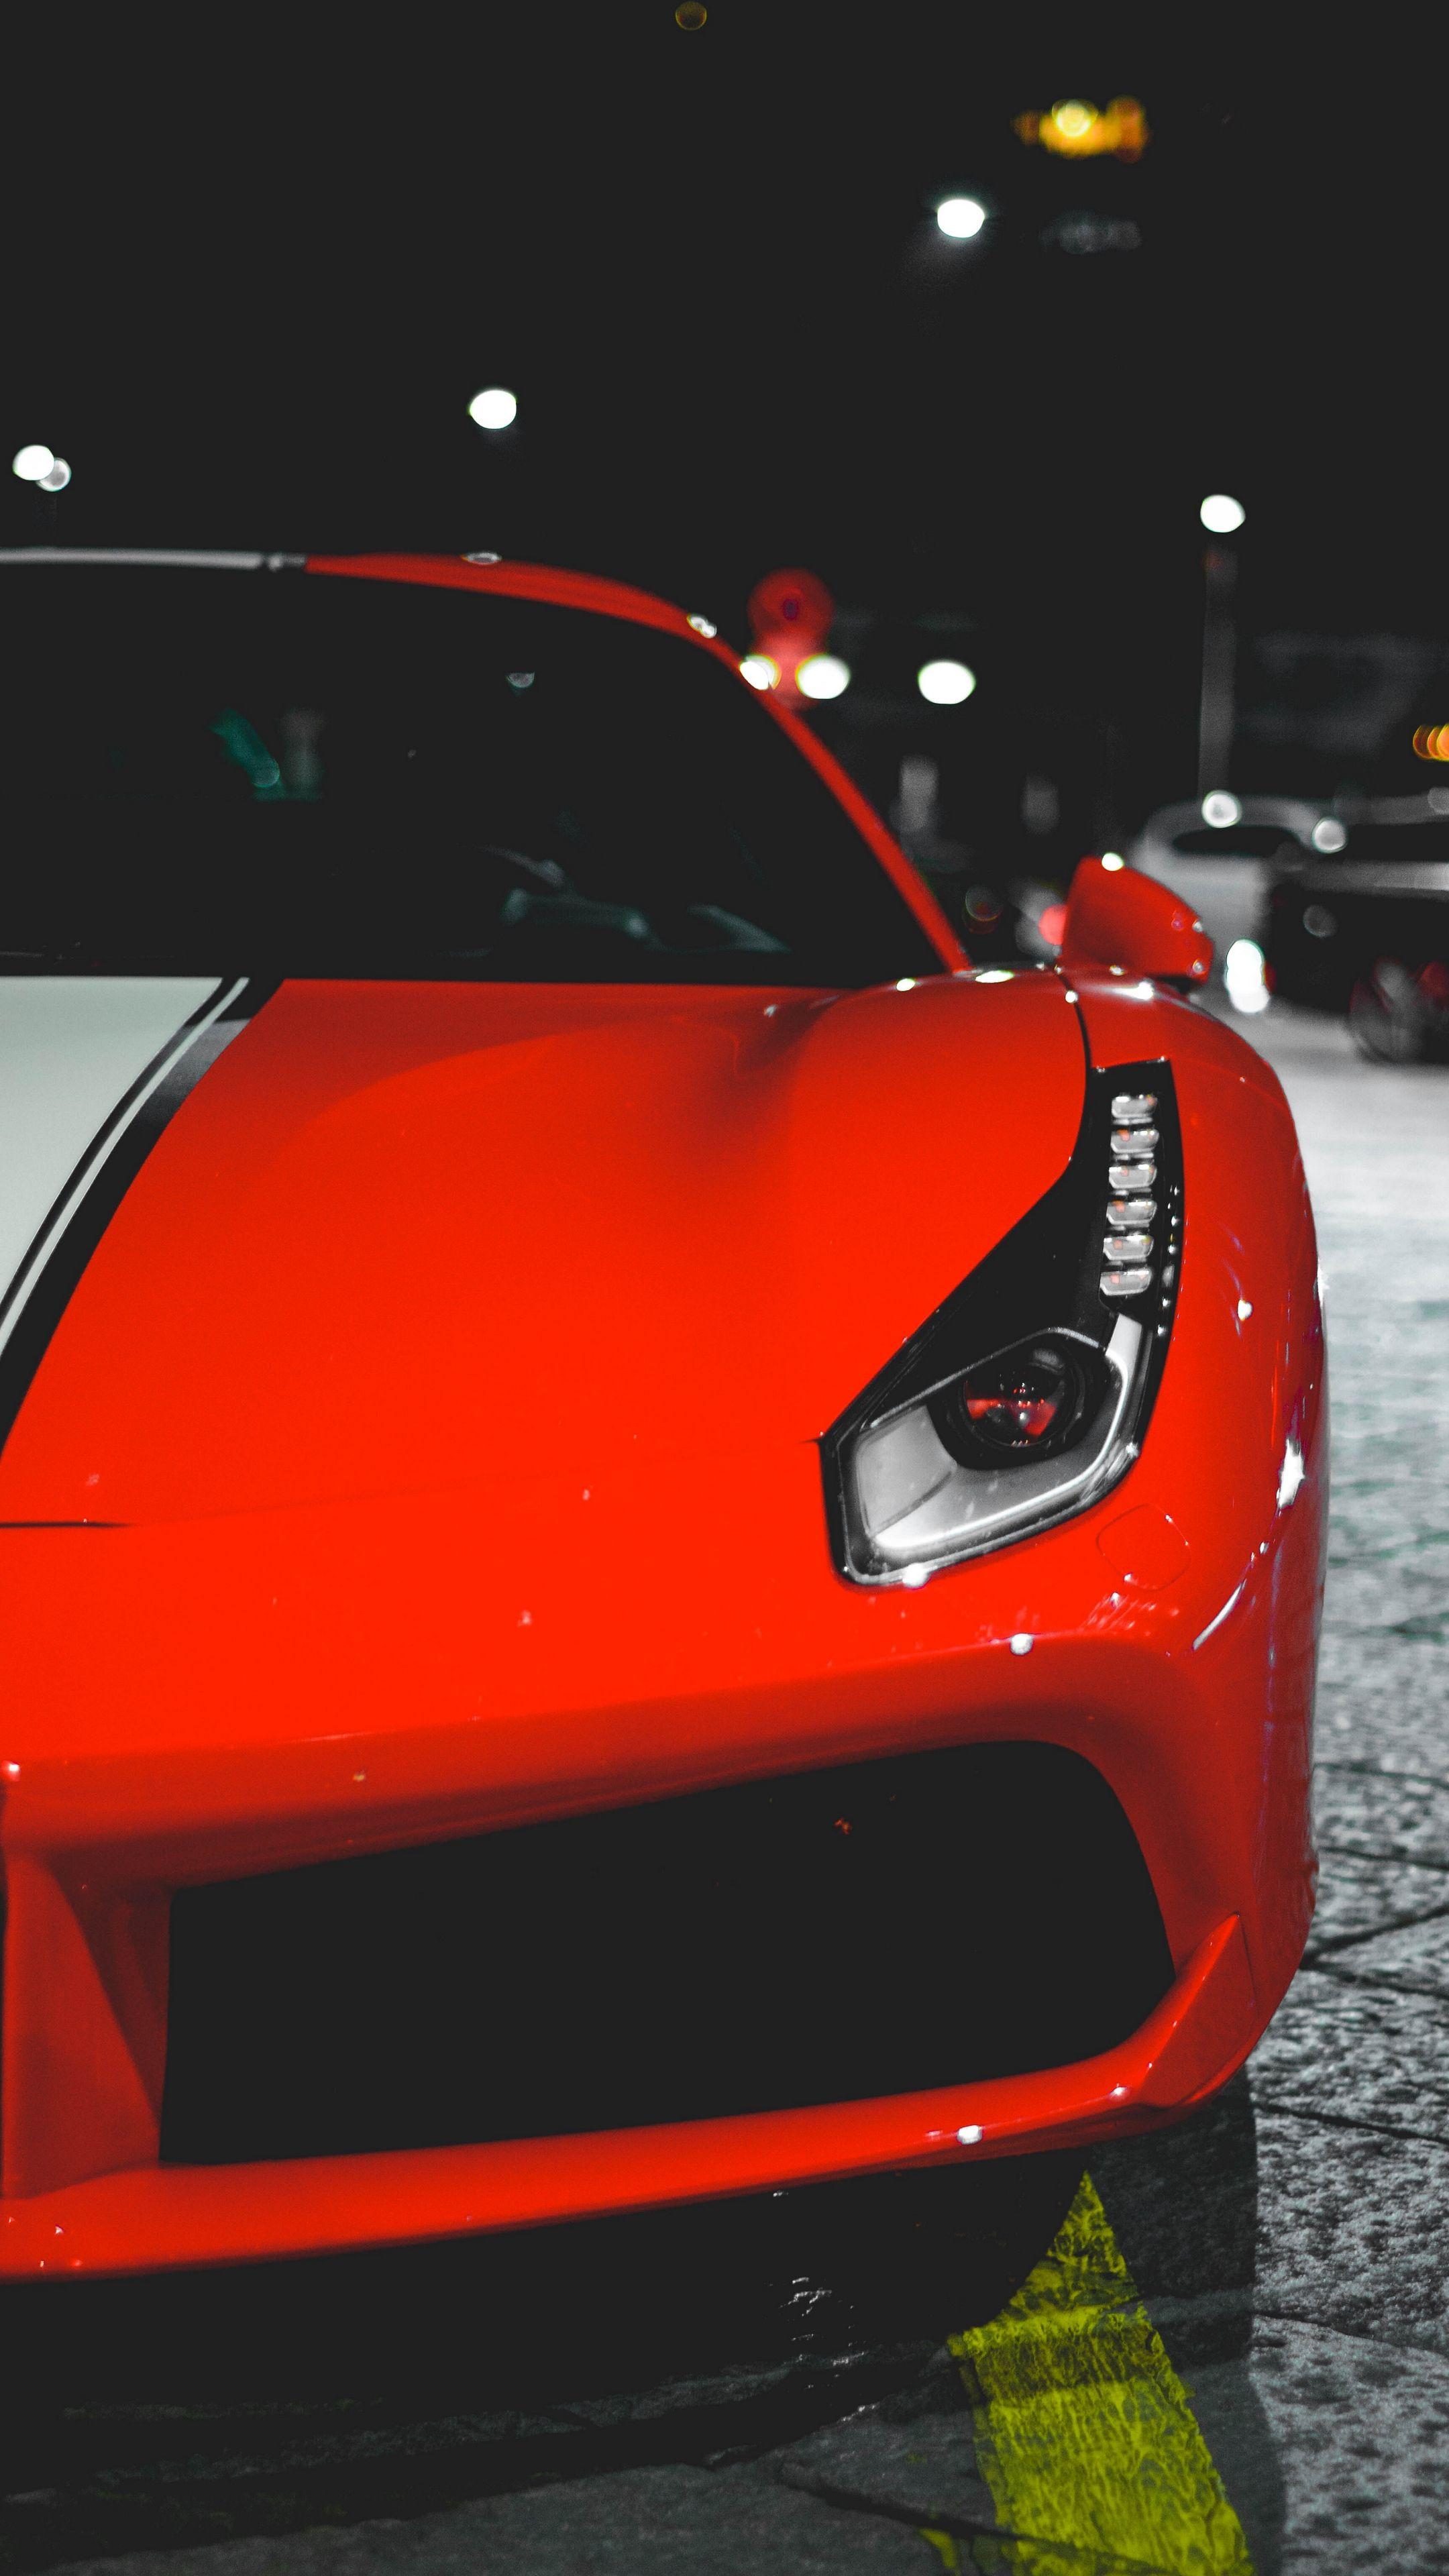 Cars #auto #frontview #red #wallpaper HD 4k background for android :). Sports car wallpaper, Car wallpaper, HD wallpaper of cars